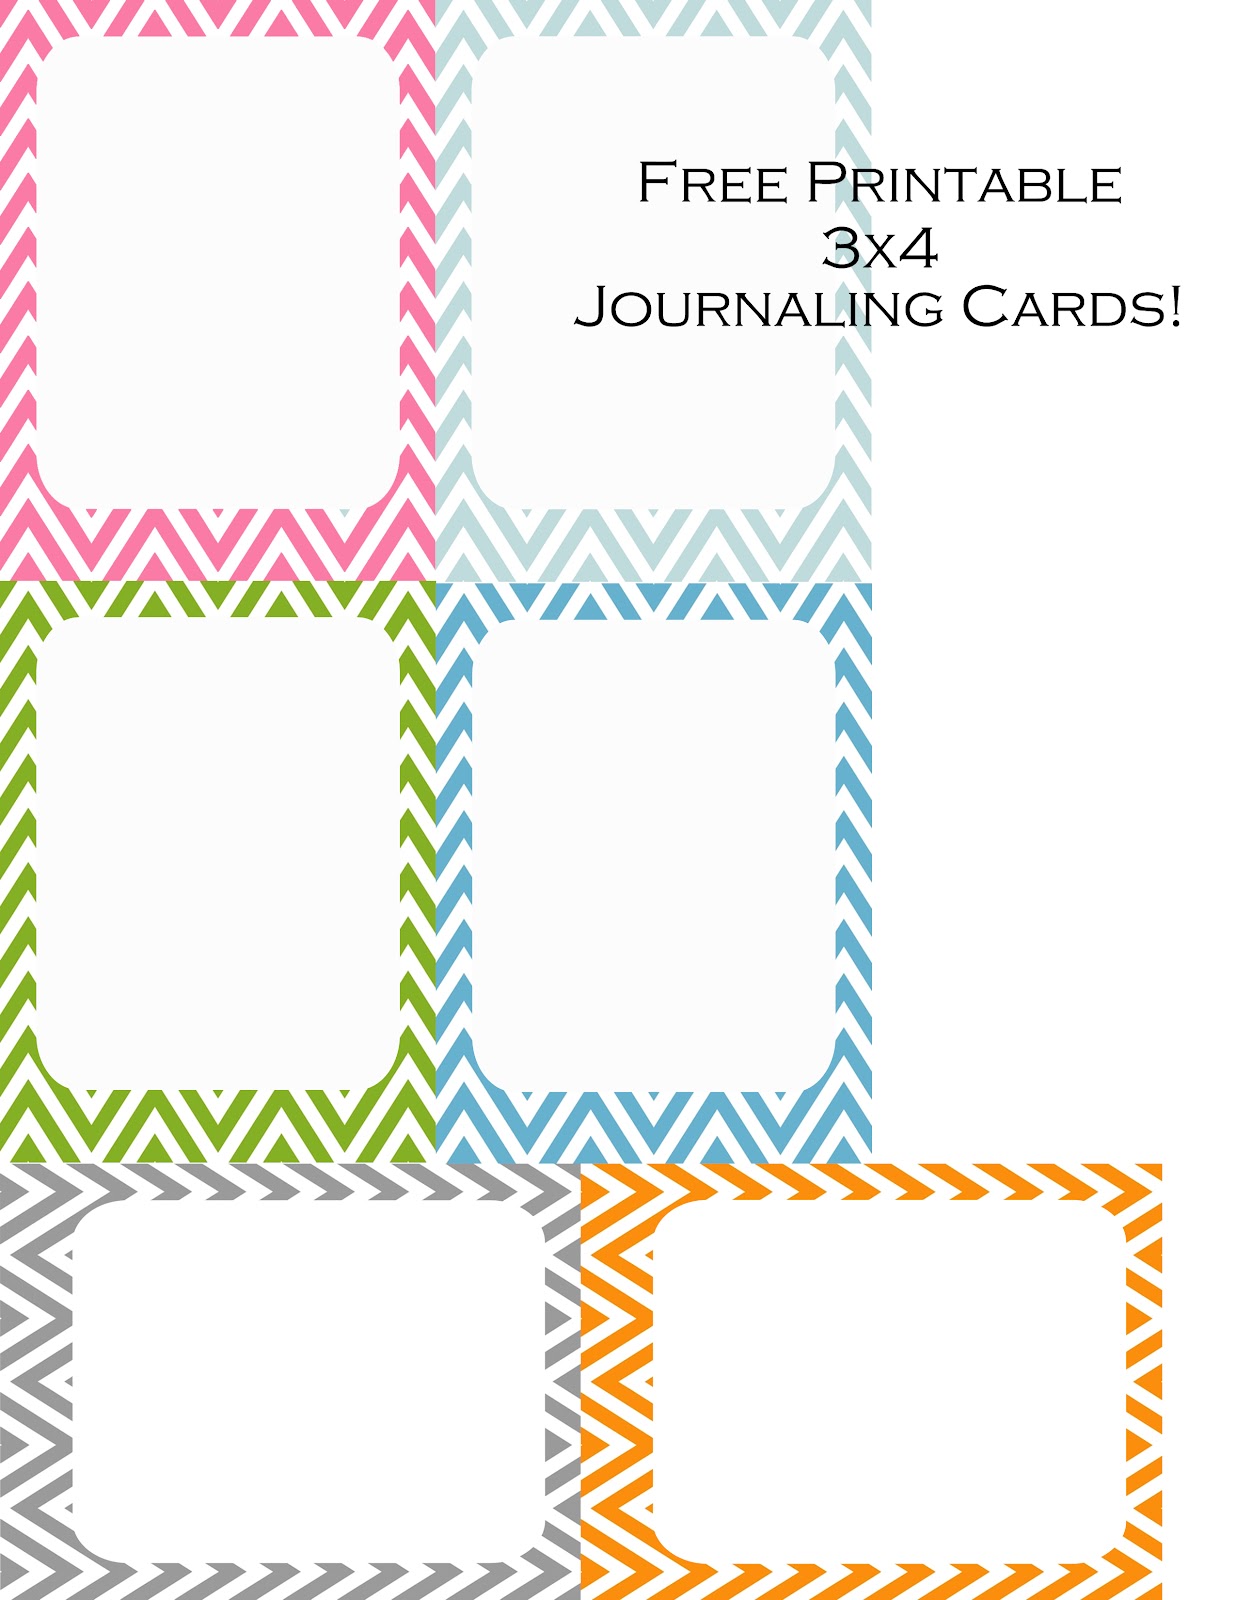 My Little Paper Addiction Free Printable 3x4 Chevron Journaling Cards